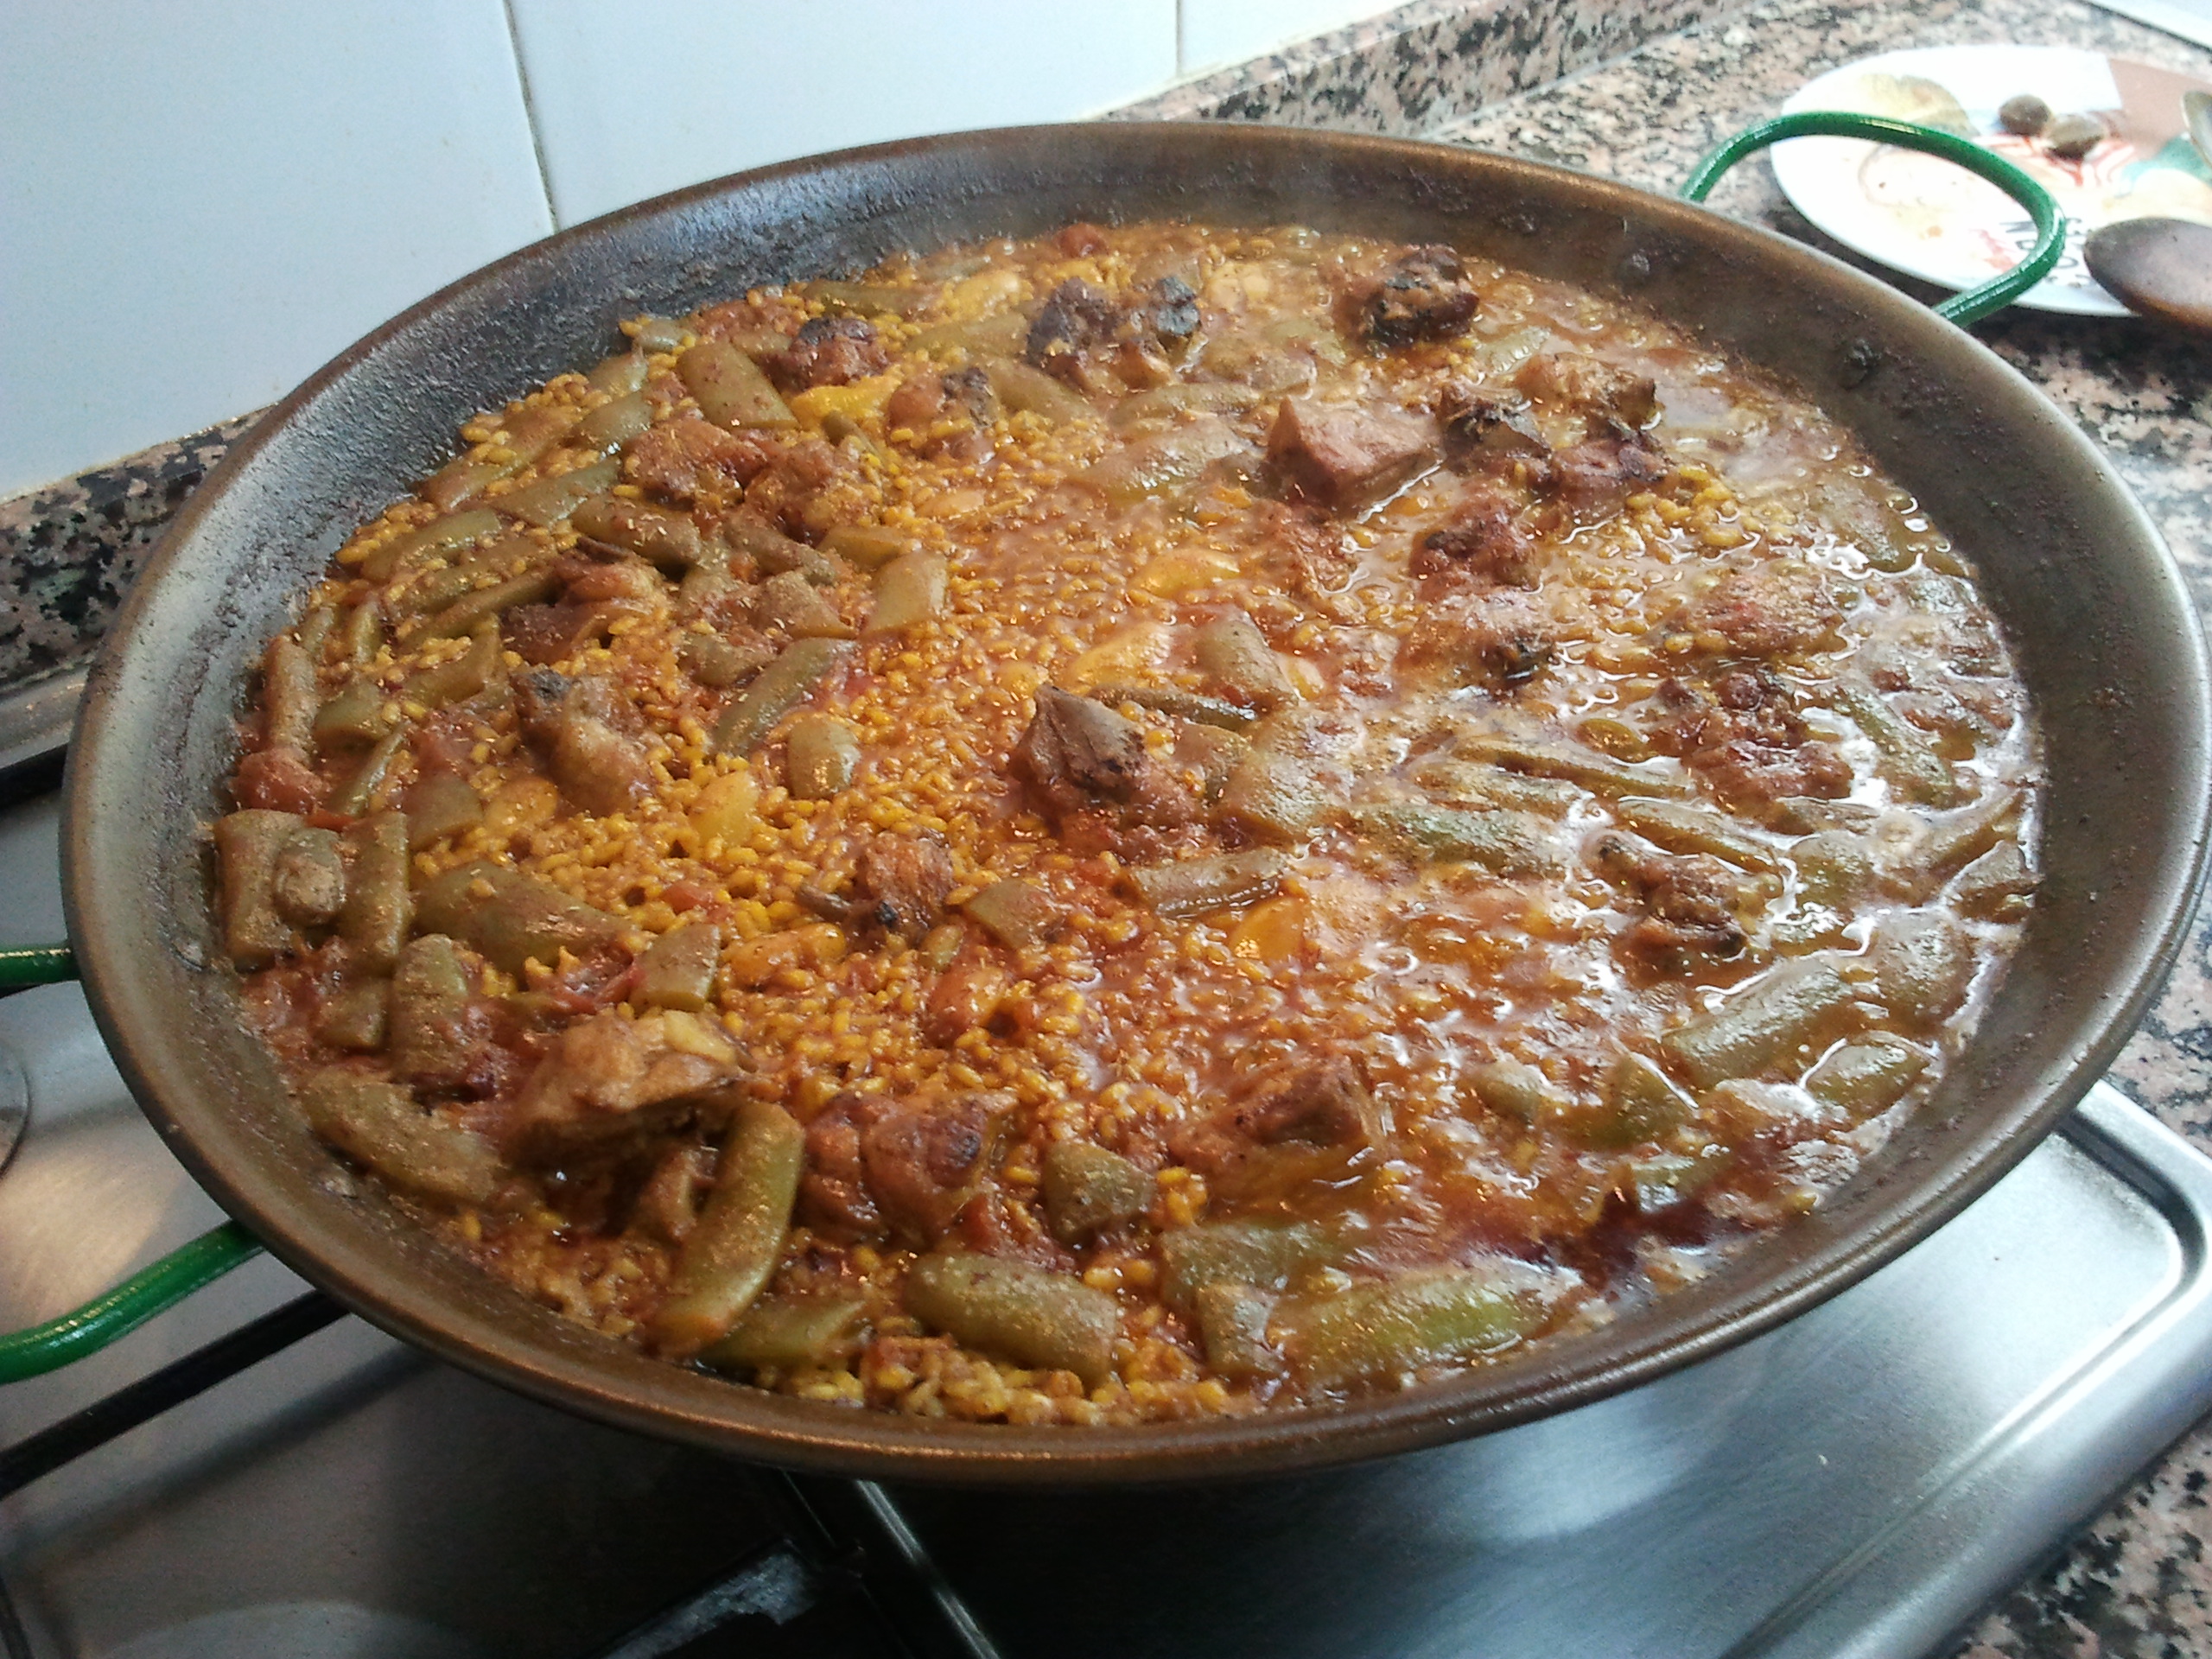 Half cooked paella with some liquid